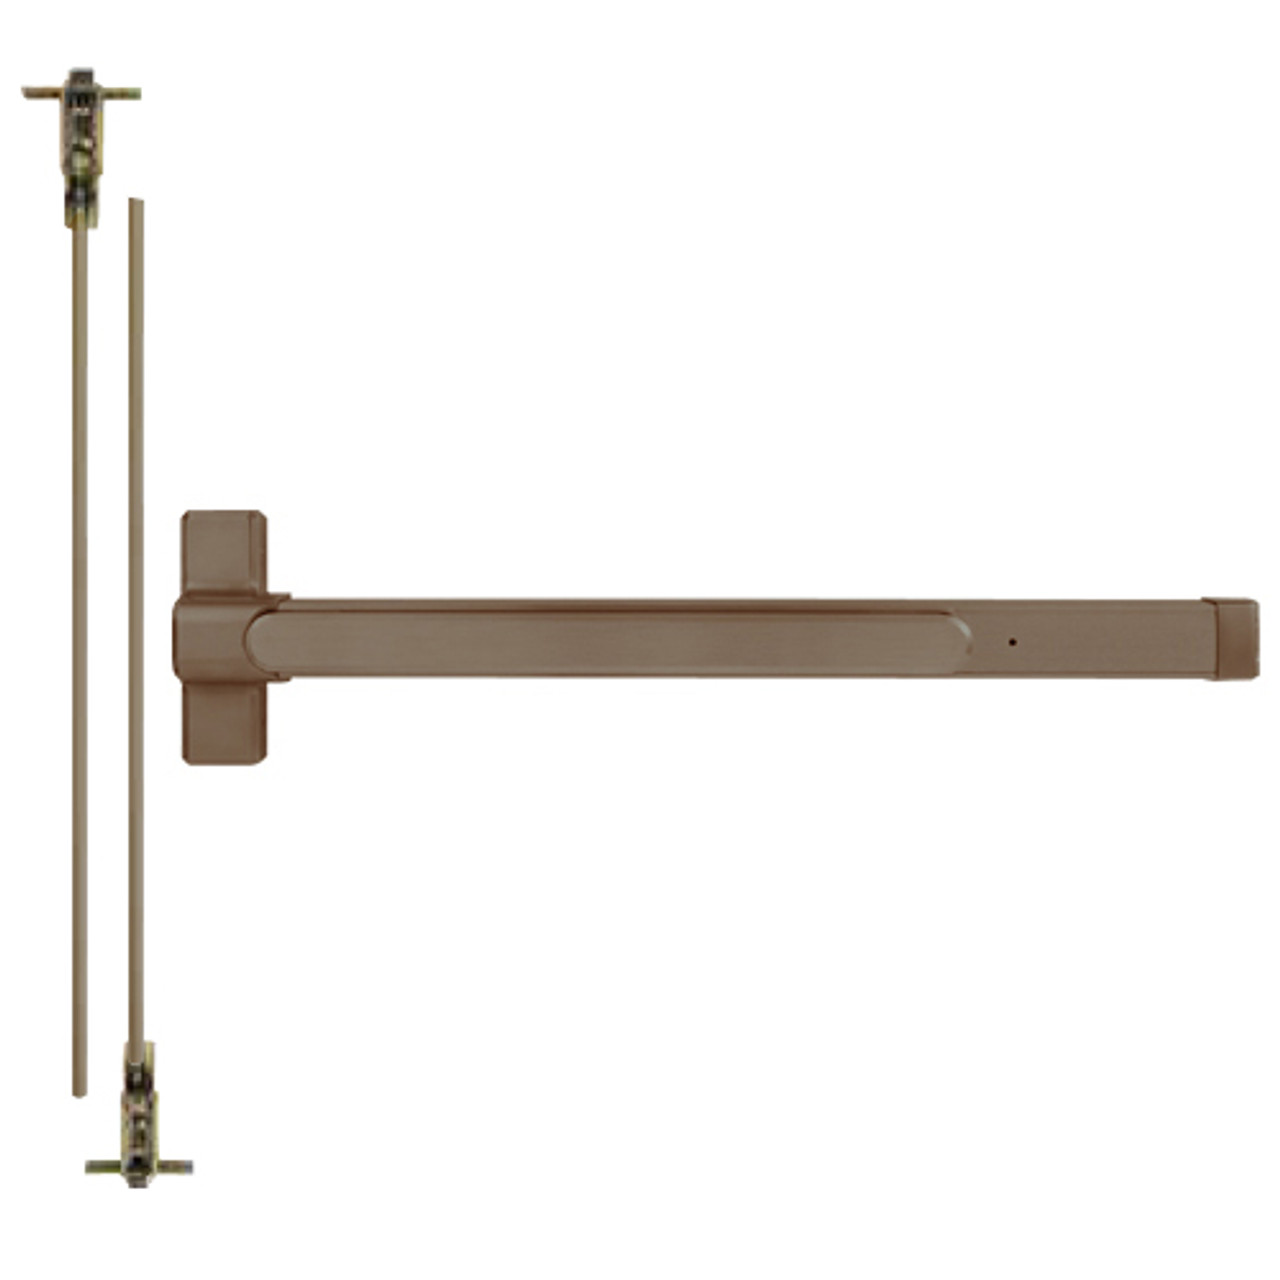 QED124EDX-48-7-313AN Stanley QED100 Series Heavy Duty Concealed Vertical Rod Hex Dog Exit Device in Anodized Duranodic Bronze Finish